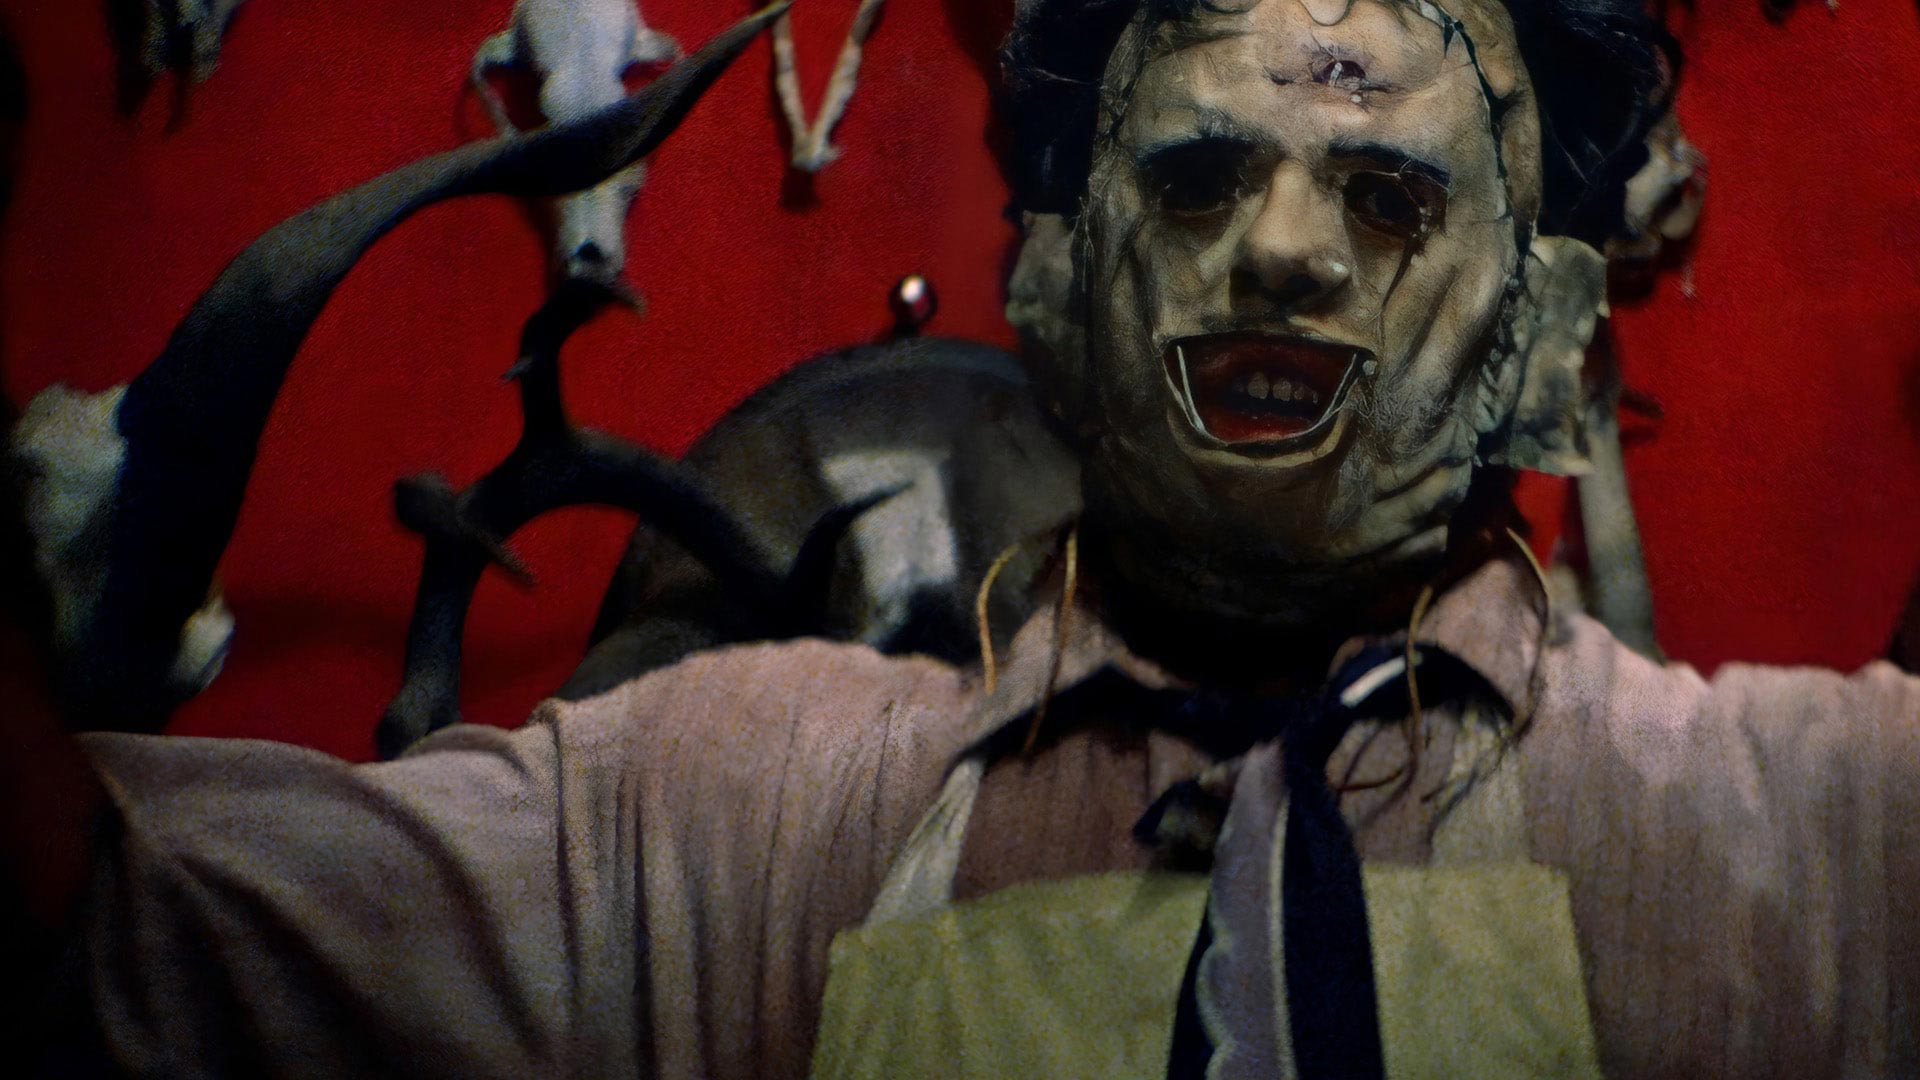 Leatherface in Texas Chainsaw Massacre